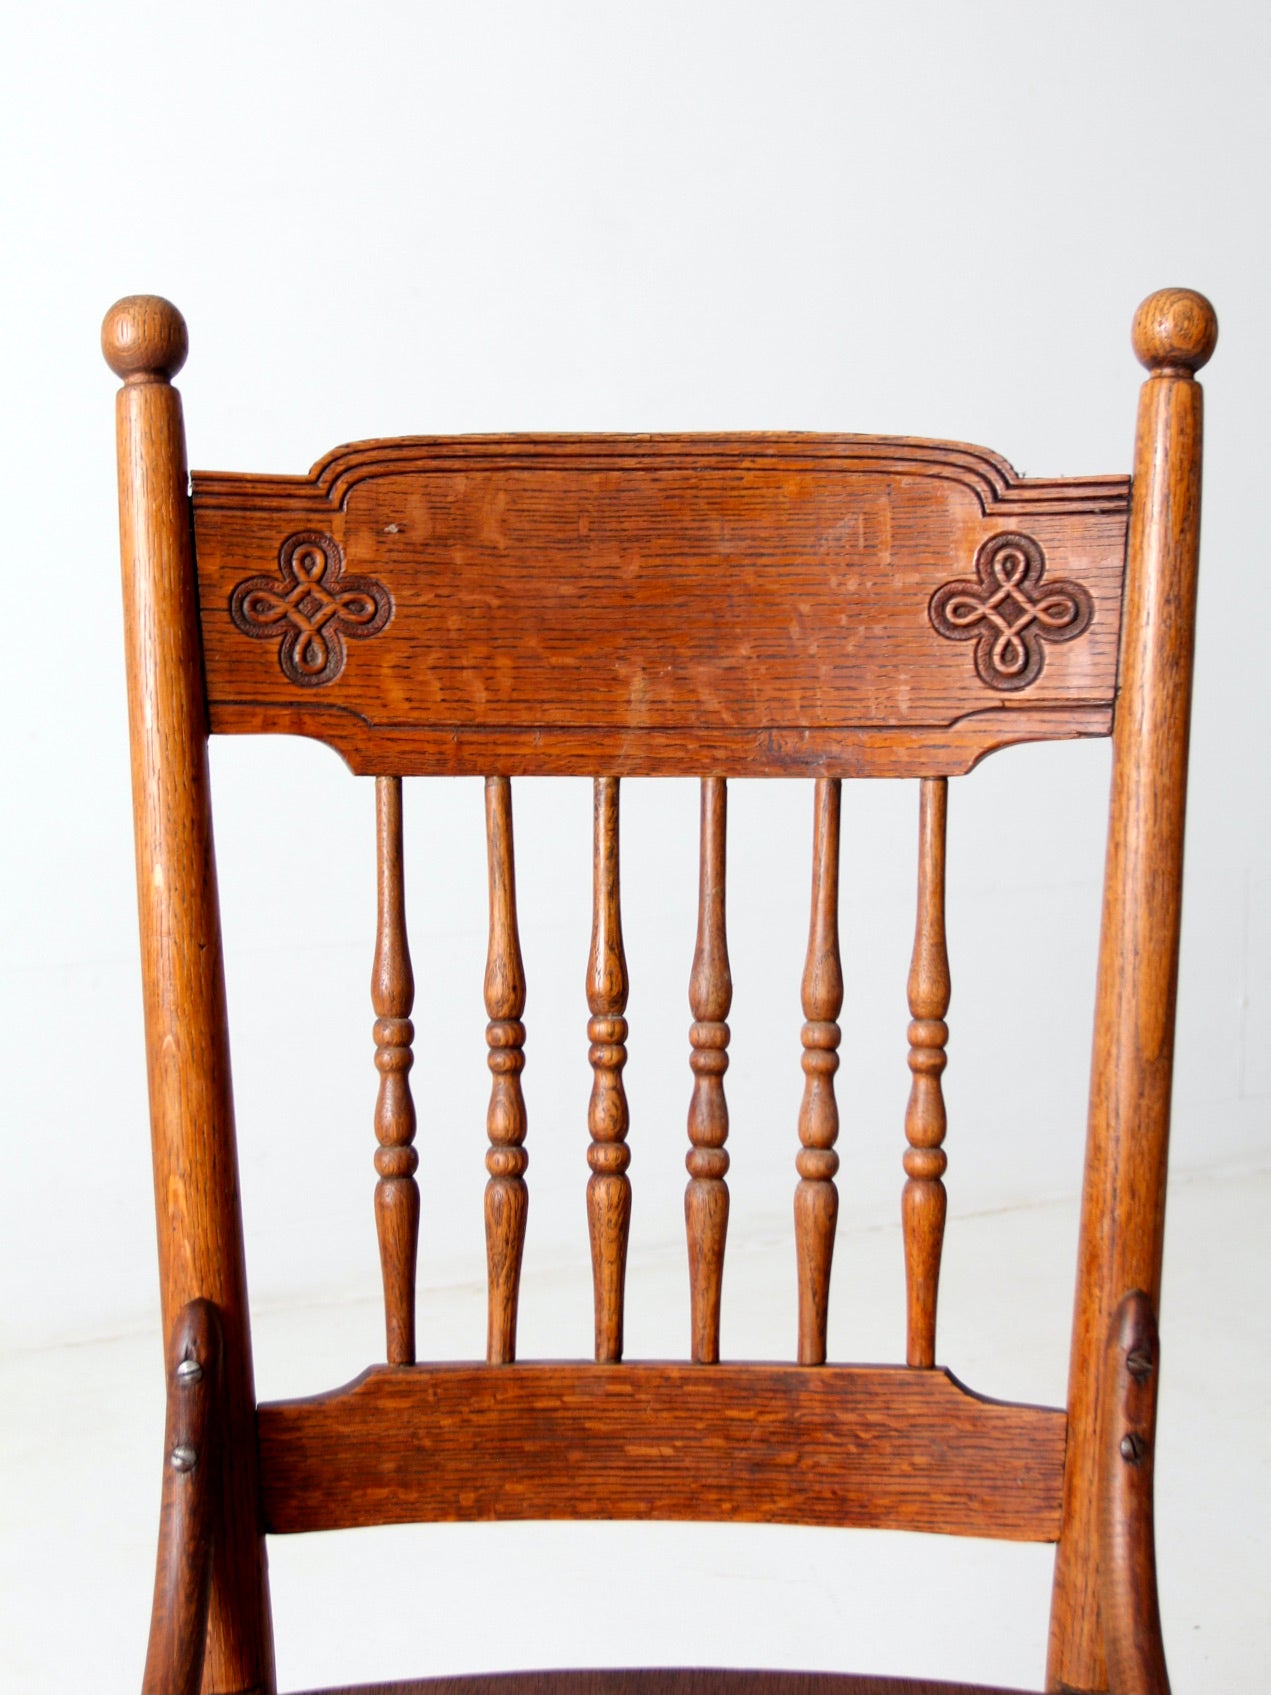 antique wooden chair with Celtic knot design